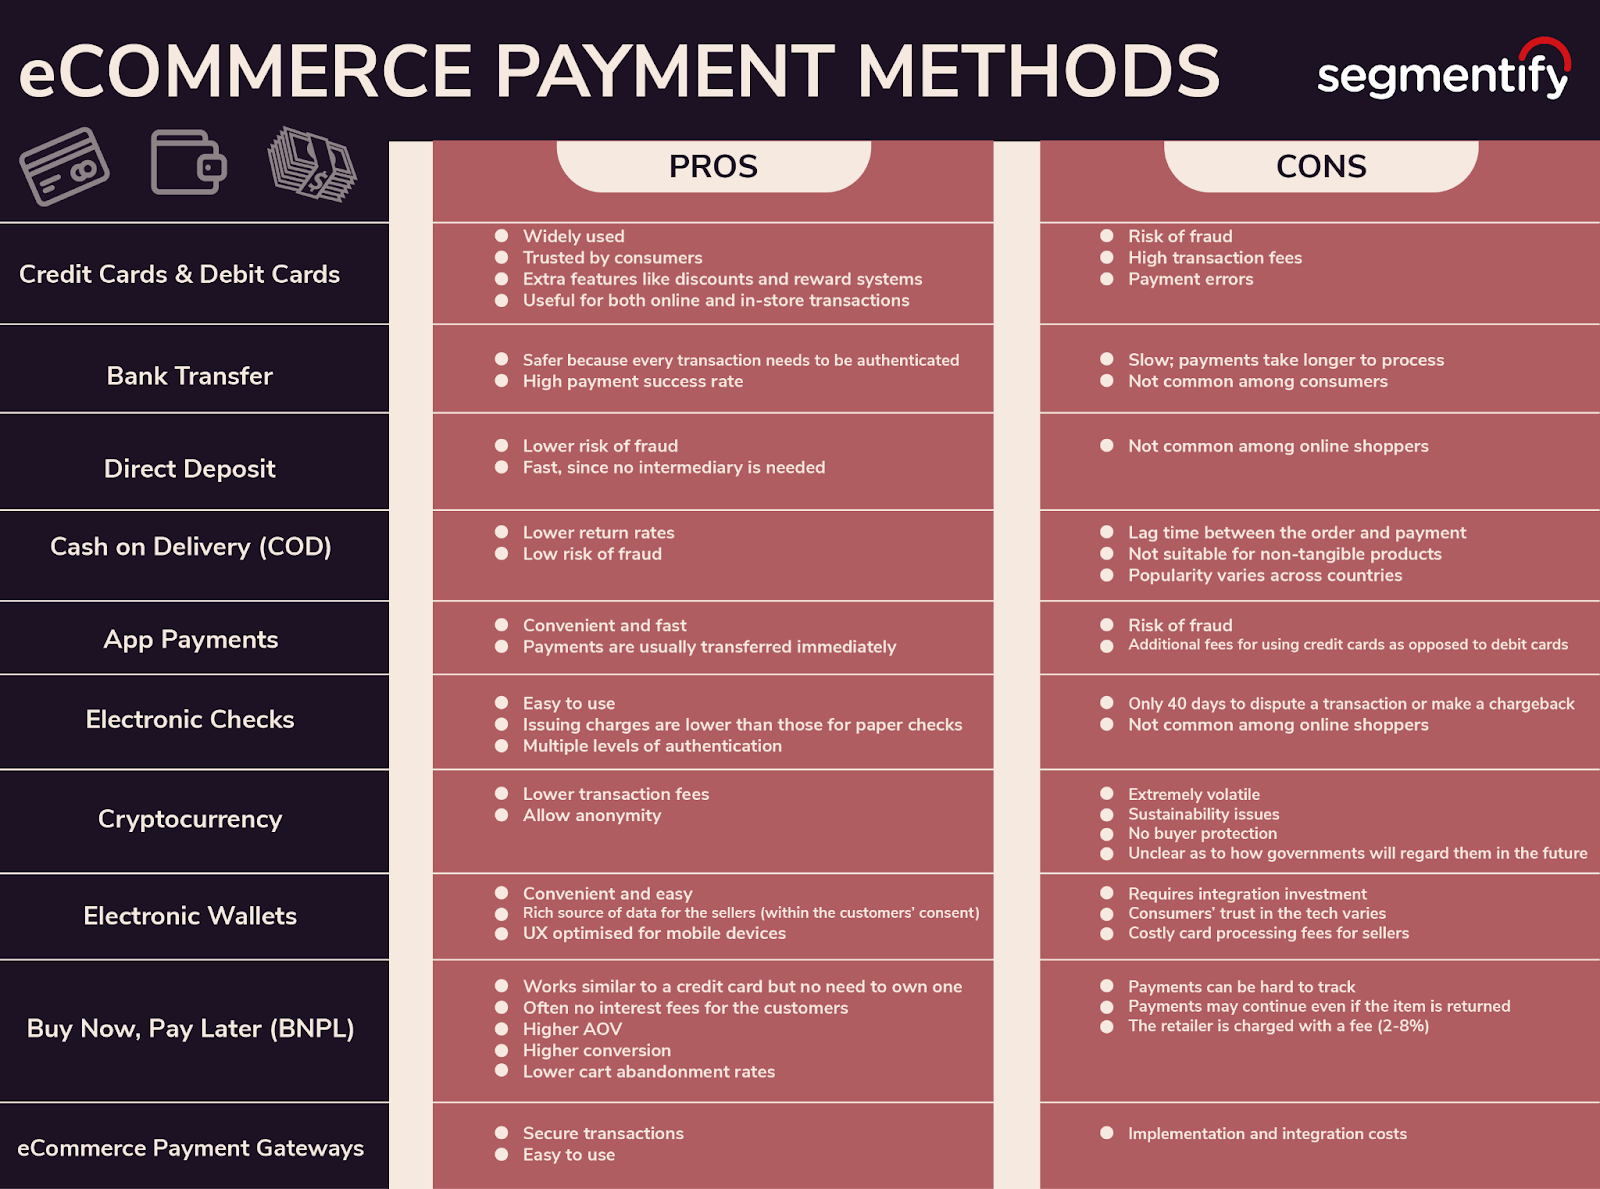 Table listing the pros and cons of each eCommerce payment method mentioned in the article